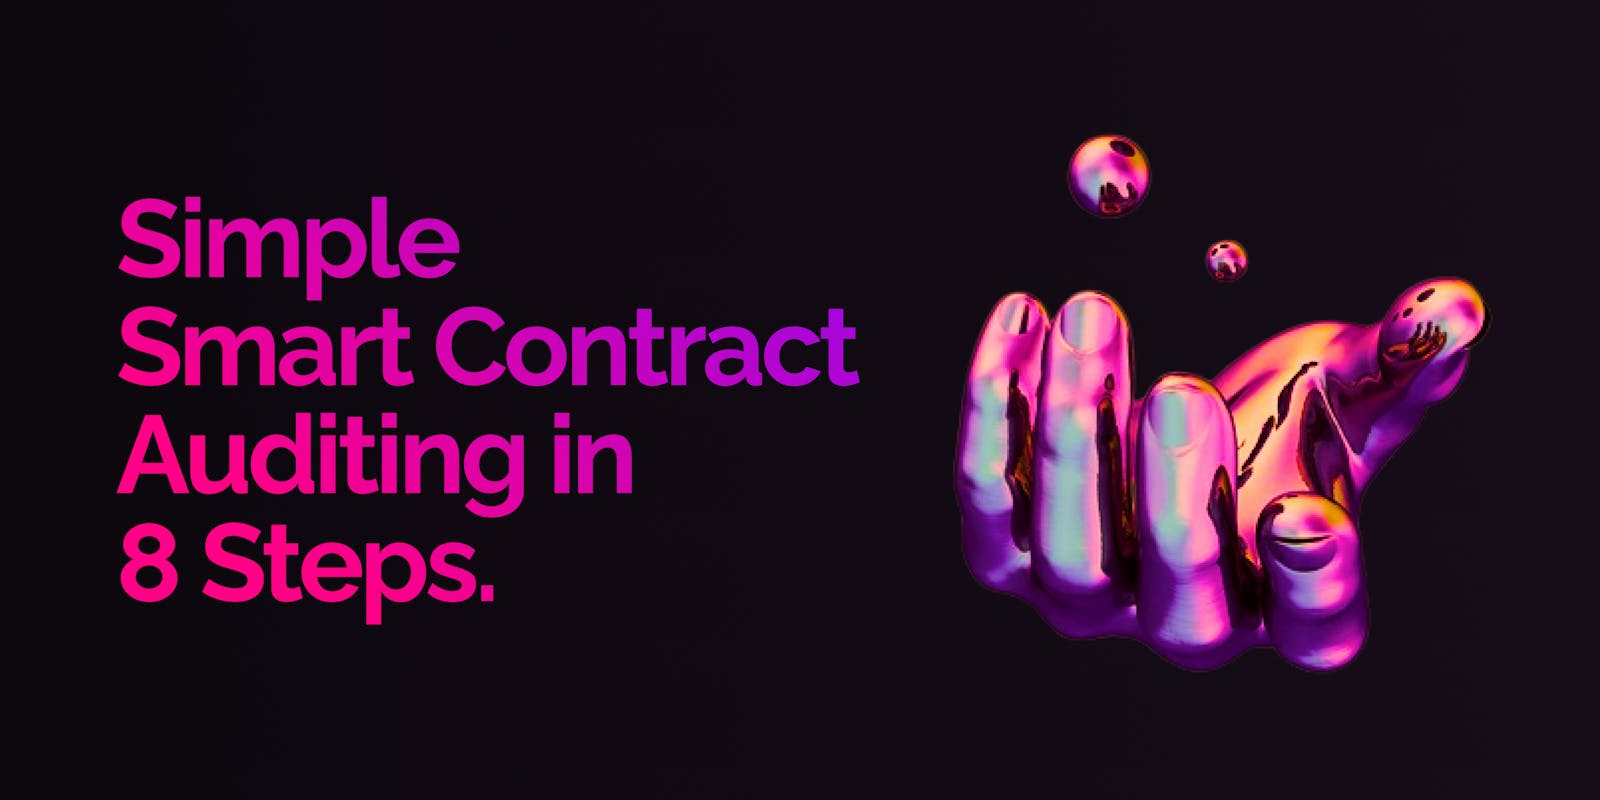 Simple Smart Contract Auditing in 8 Steps